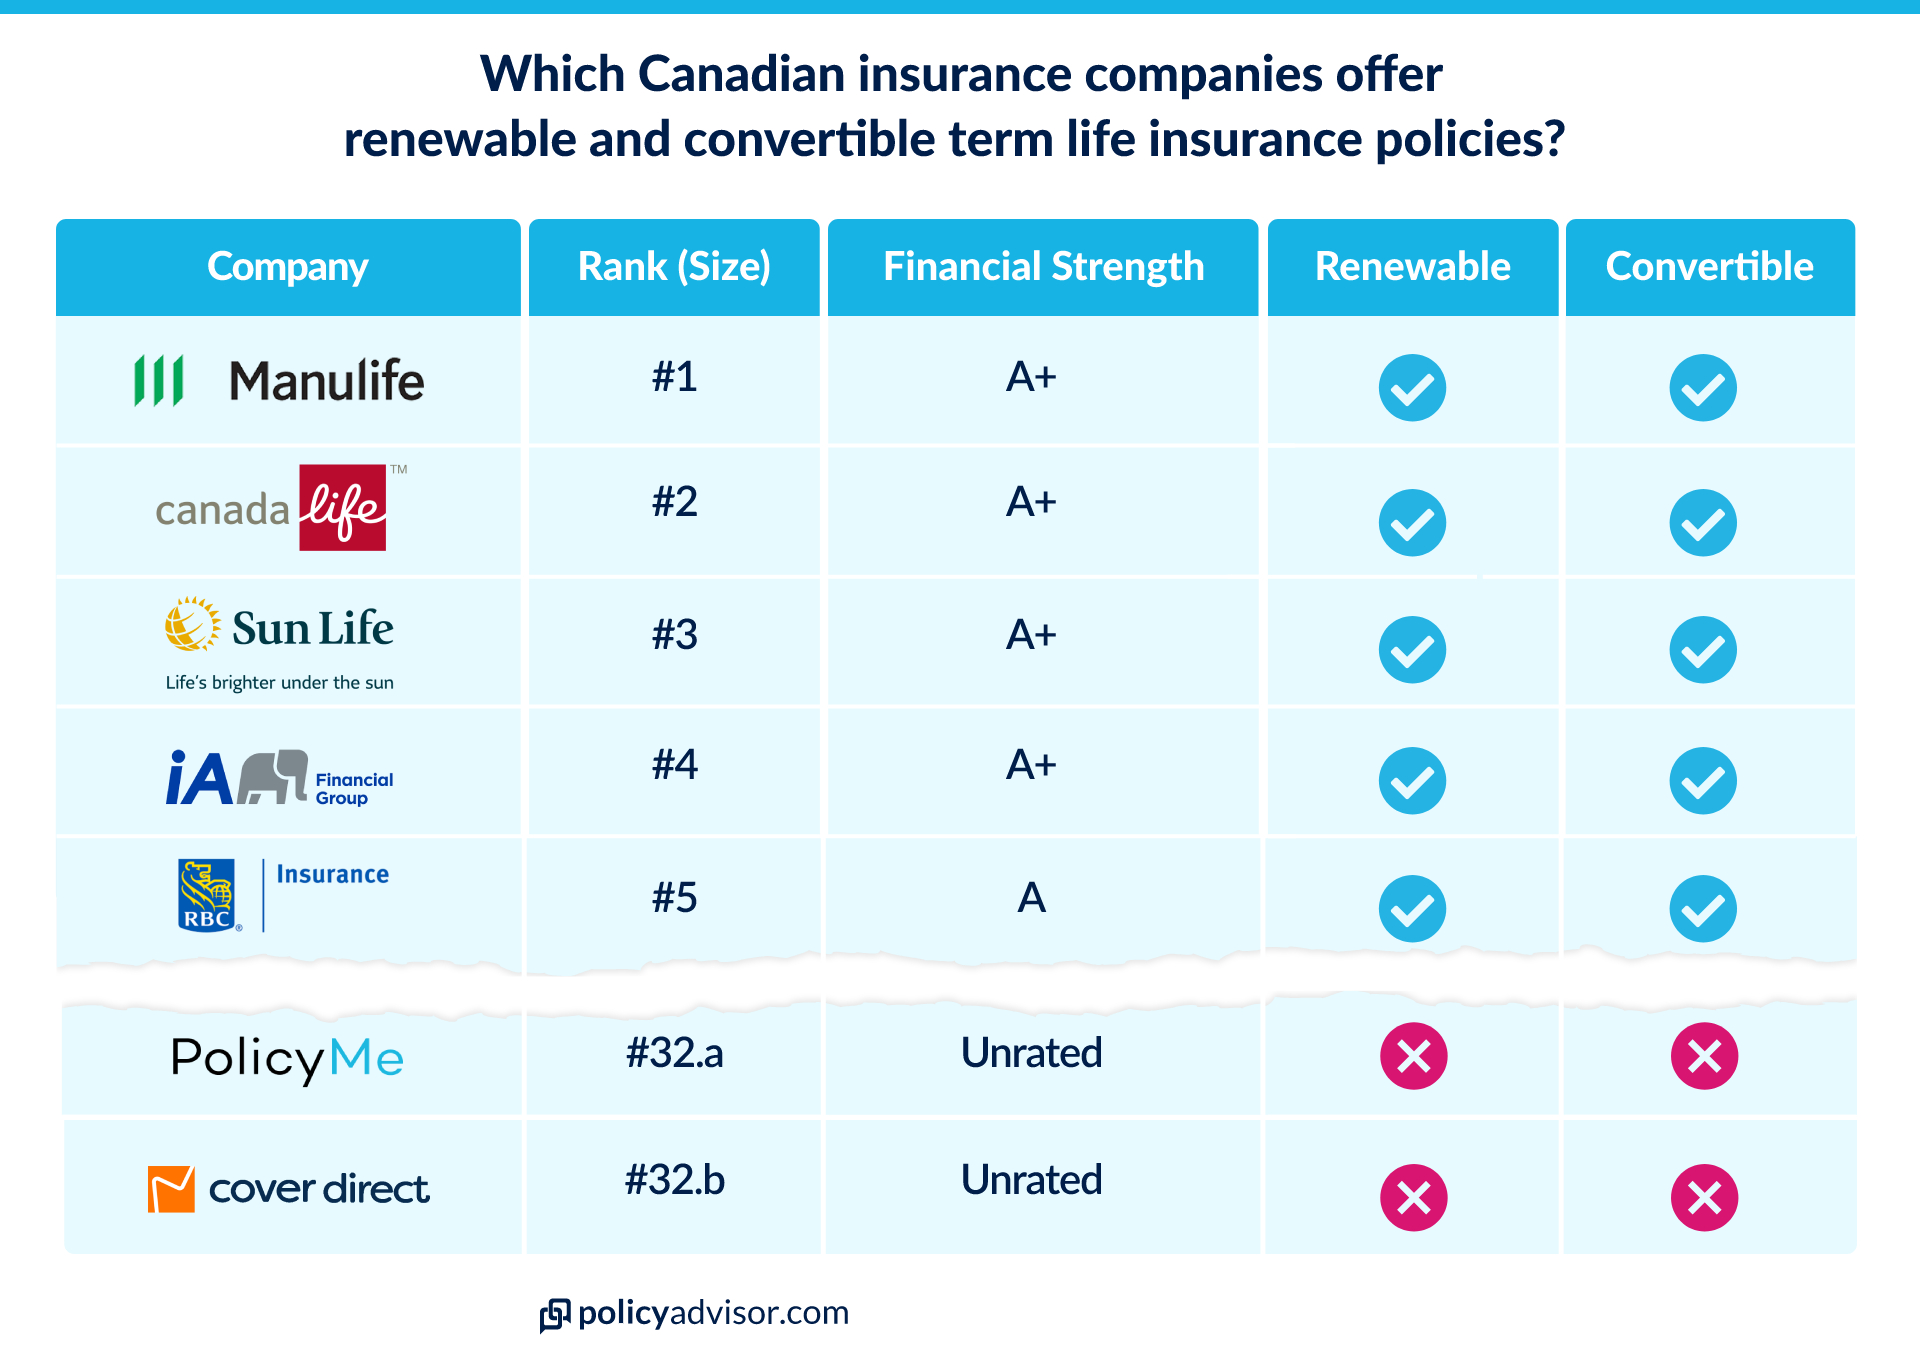 life insurance company comparison for standard features